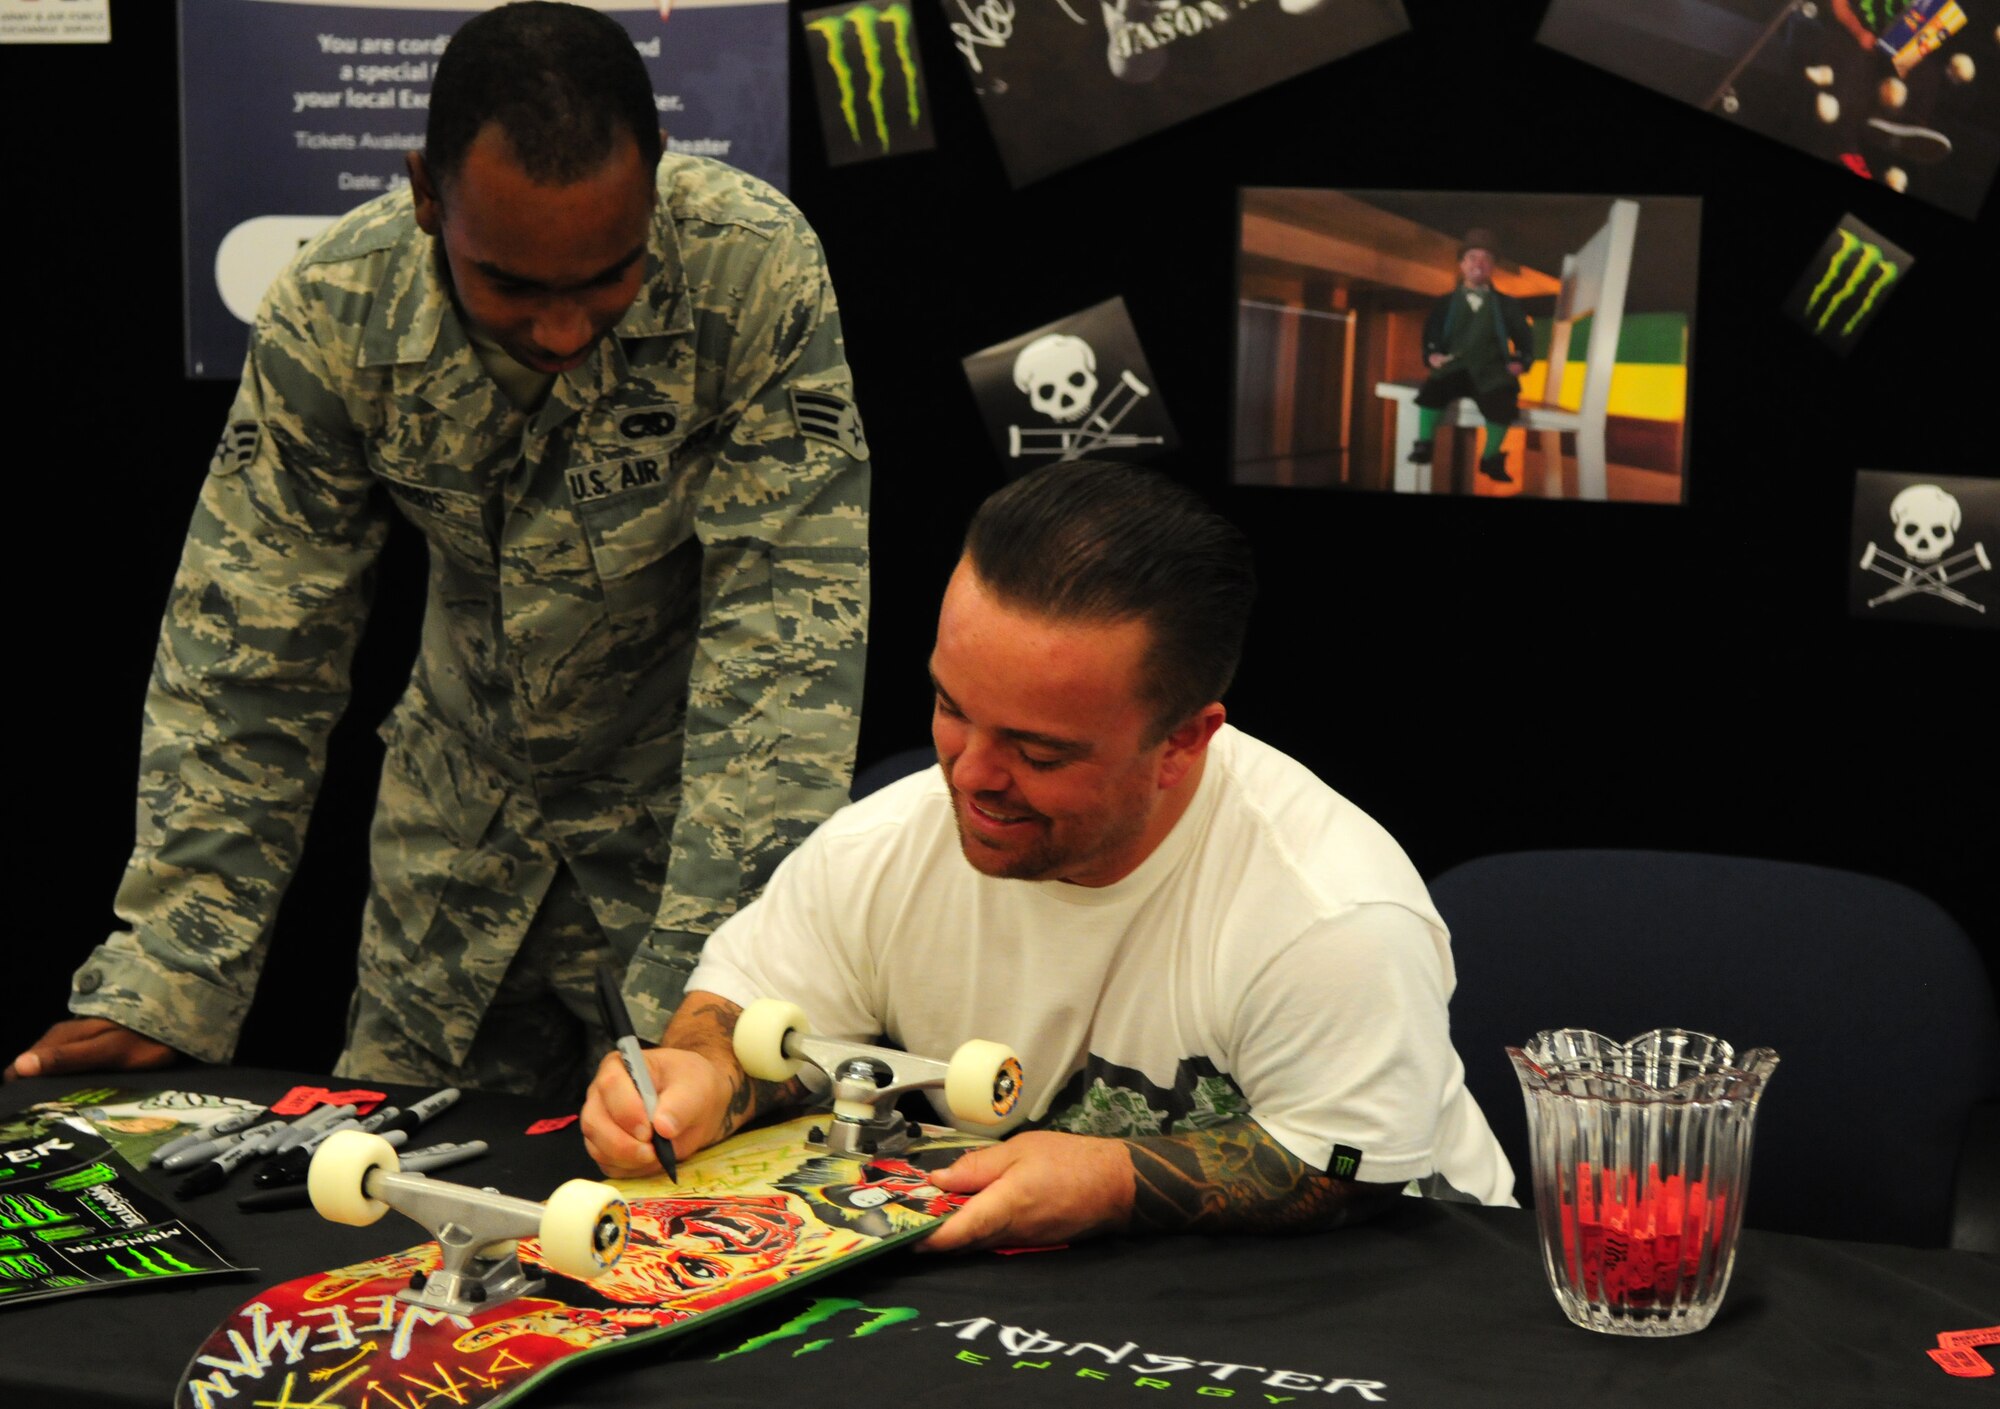 Actor Jason “Wee Man” Acuña autographs a skateboard that Senior Airman Lyndon Harris, 734th Air Mobility Squadron, won in a raffle drawing at the Base Exchange on Andersen Air Force Base, Guam, Jan. 9. Wee Man Signed autographs, raffled prizes, conducted a skateboard demonstration and previewed his newest movie for Airmen and family members at Andersen as part of his Wee Man Salutes the Service tour. (U.S. Air Force photo by Senior Airman Robert Hicks/Released)